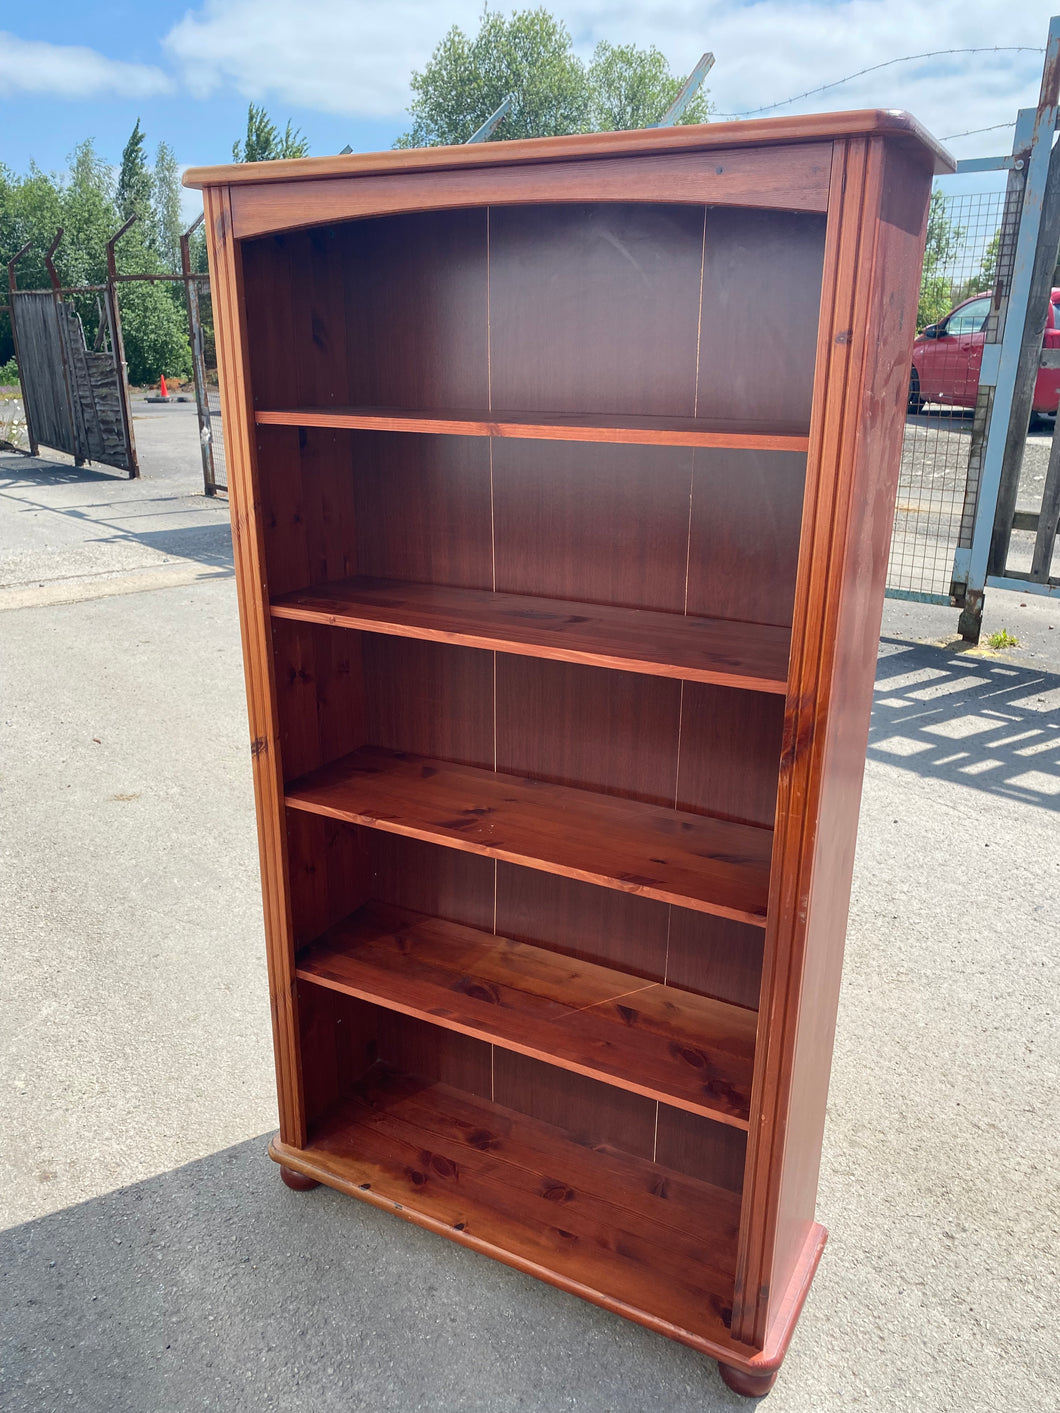 This high-quality pine bookcase is durable and in great shape. It includes 4 adjustable shelves, though some minor wear is evident from prior use.  Overall Dimensions  87cm wide x 28cm deep x 153cm high